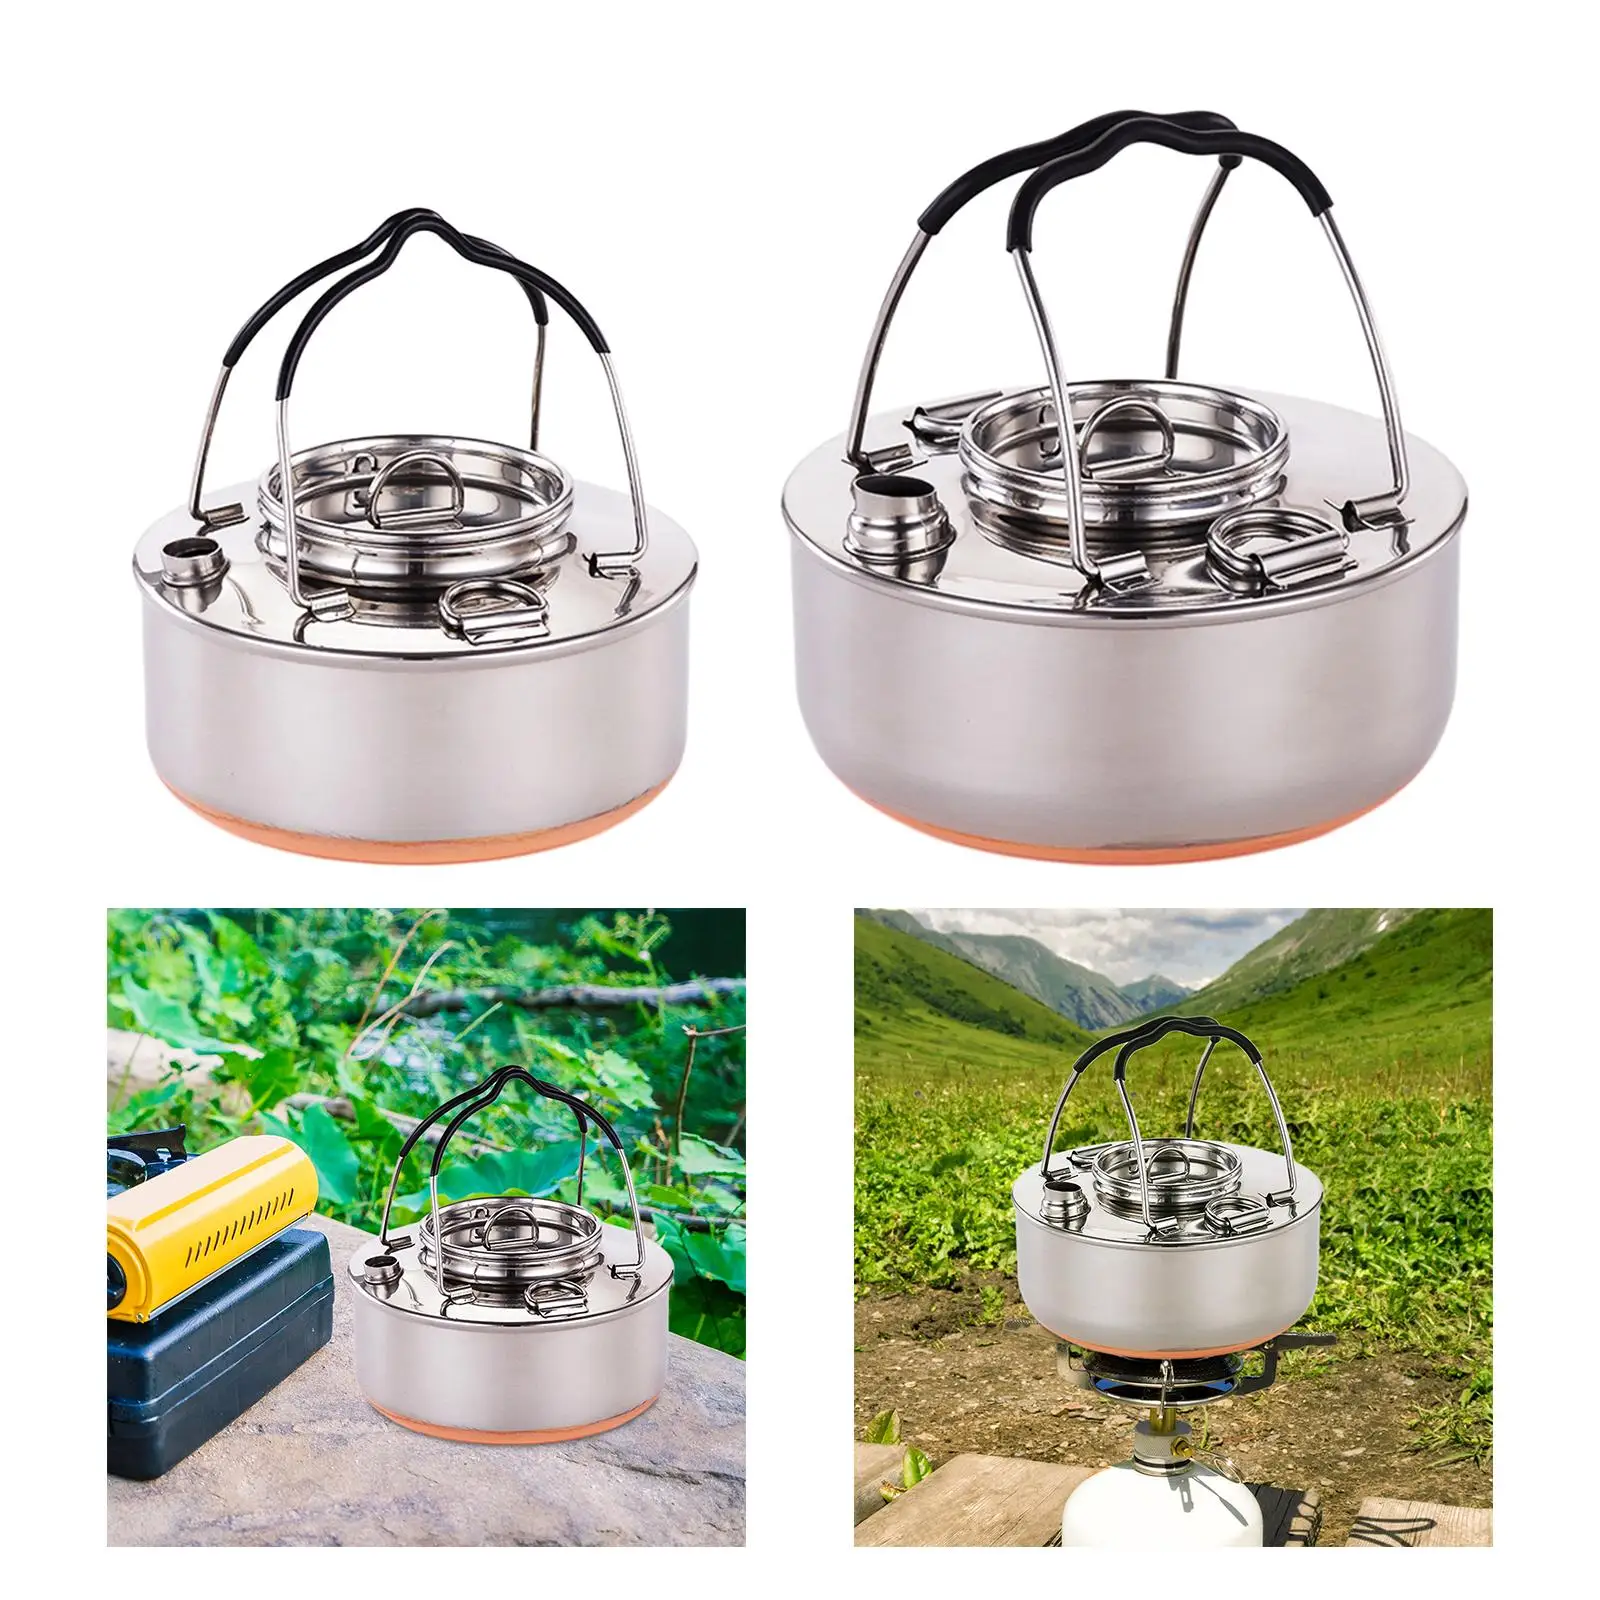 Camping Kettle Water Kettle Outdoor Boiling Water Stainless Steel Camping Tea Kettle Teapot for Camp Hiking Backyard Barbecue